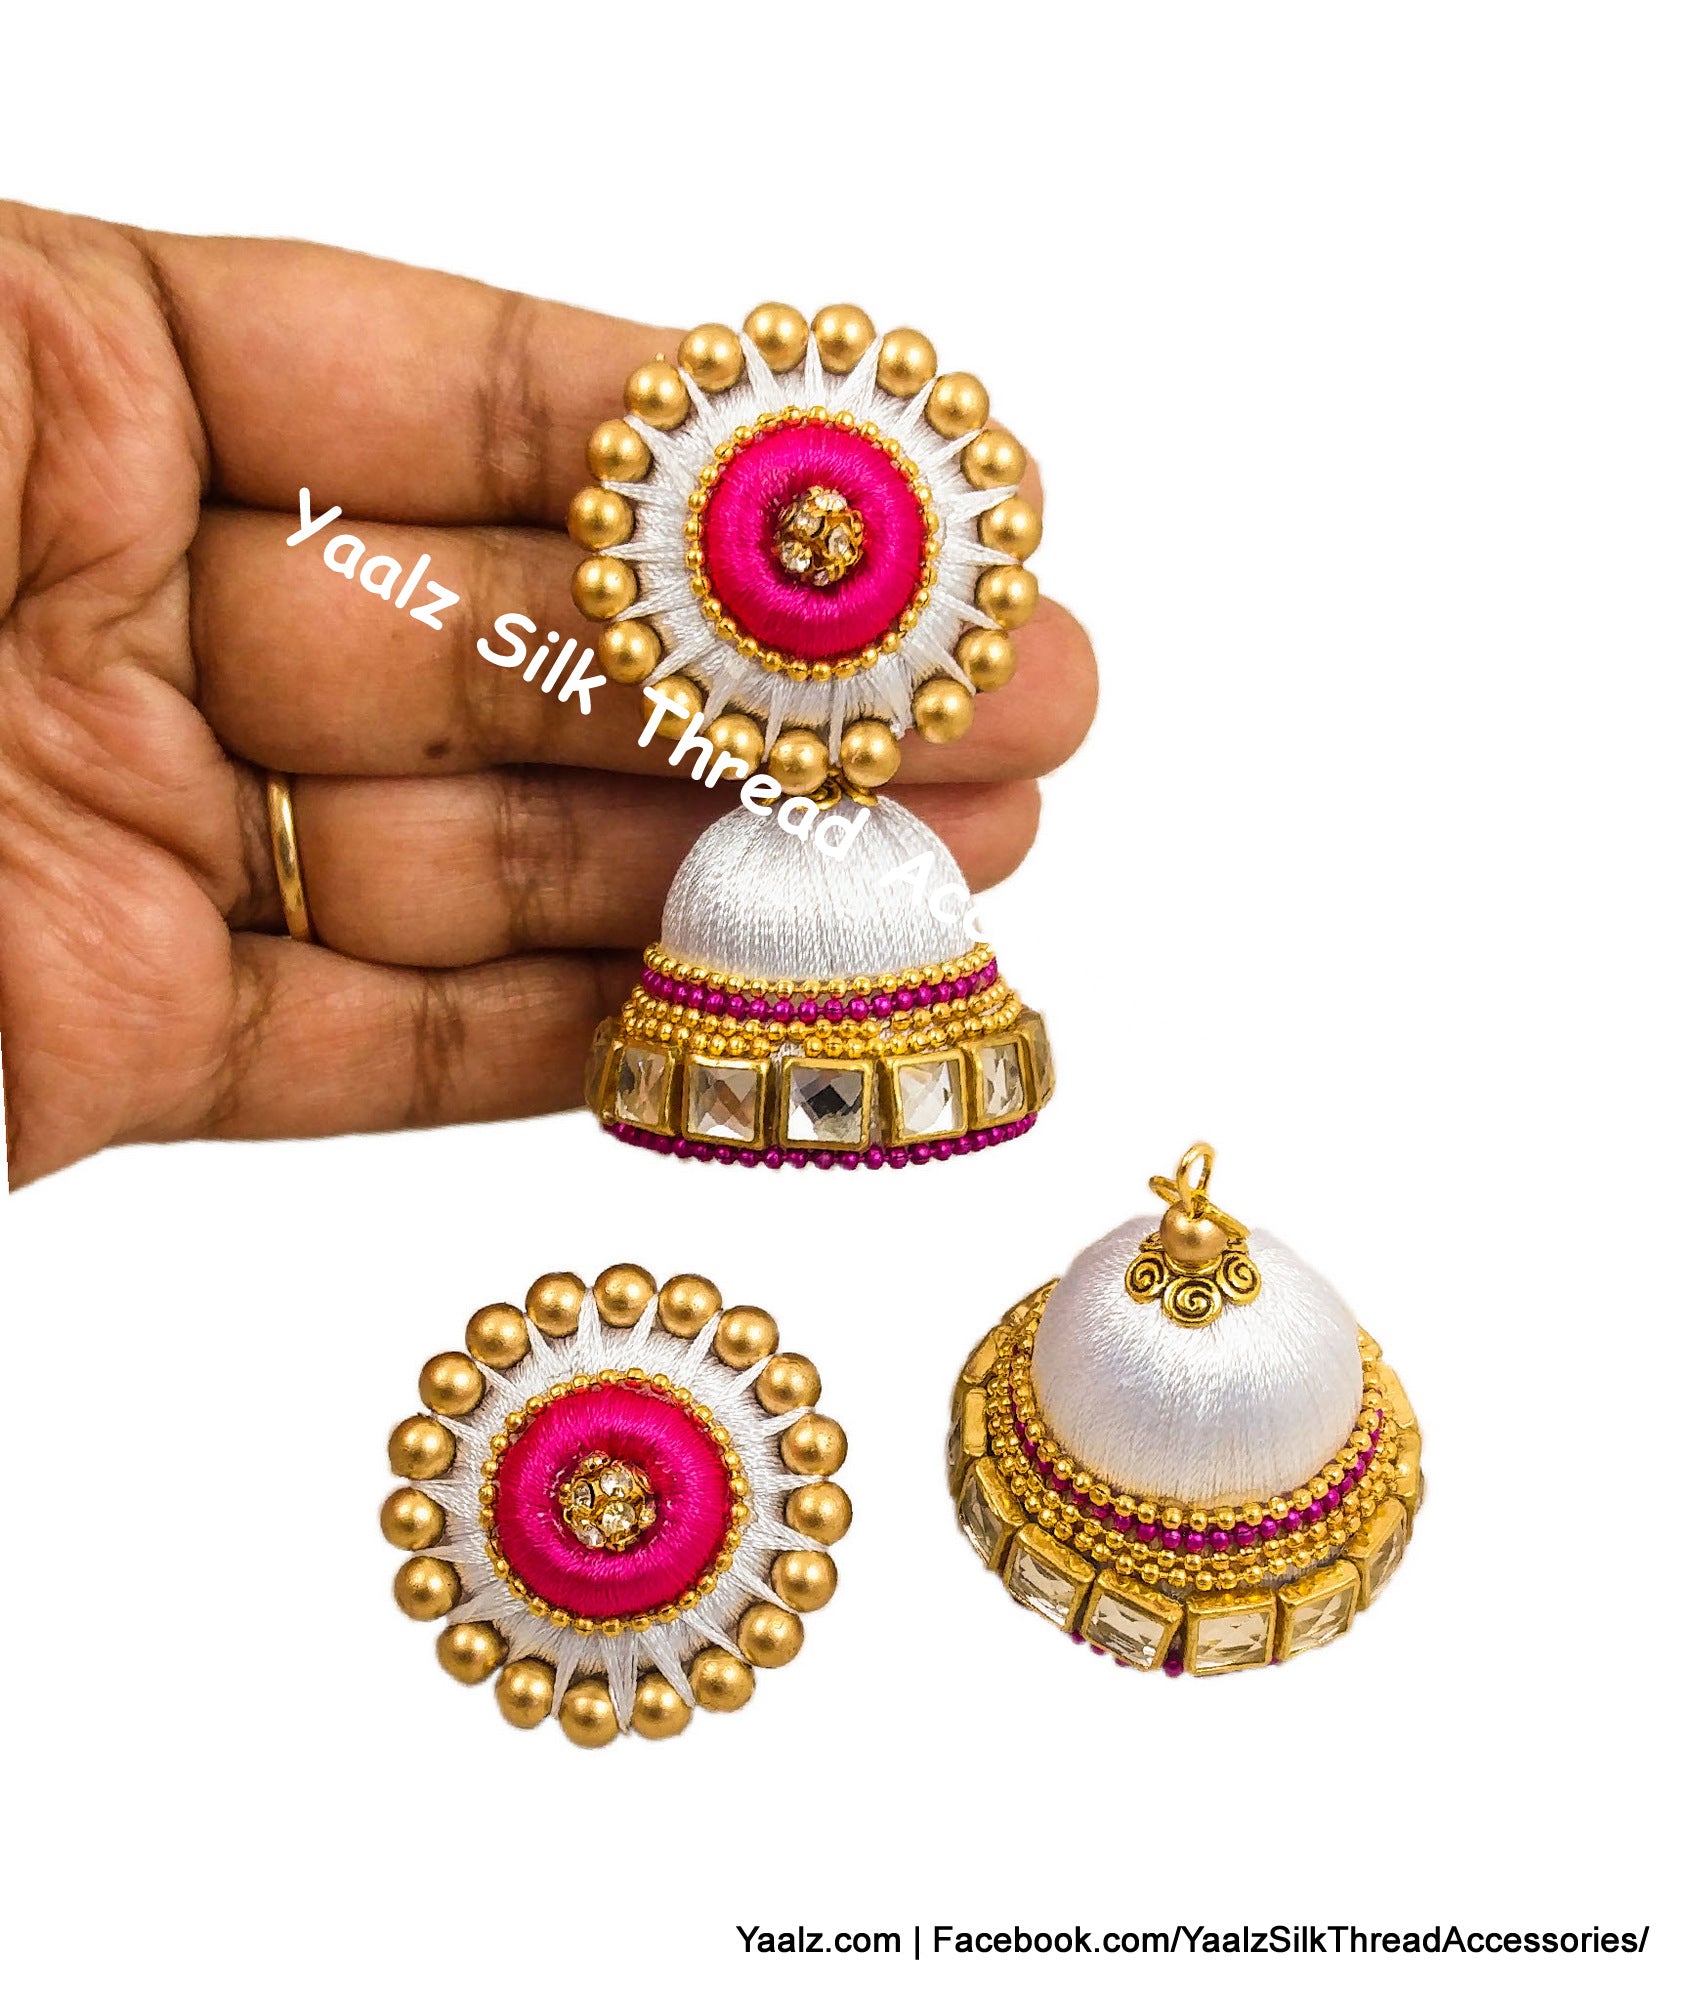 Earrings – Silk thread and loreal beads hoop – The Project DIY